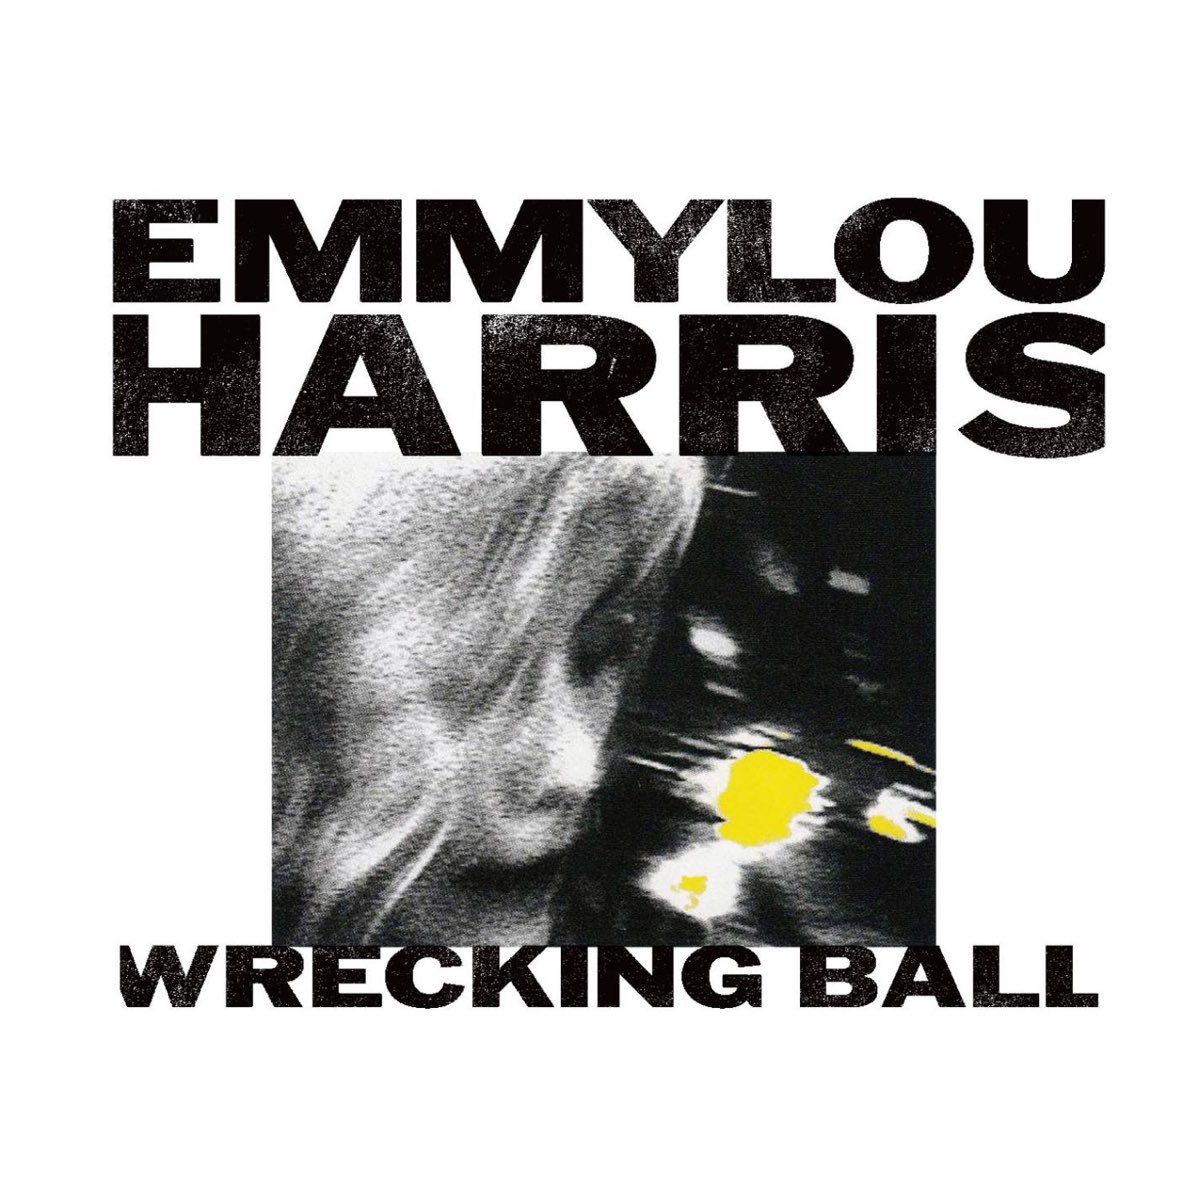 Wrecking Ball by Emmylou Harris on Apple Music